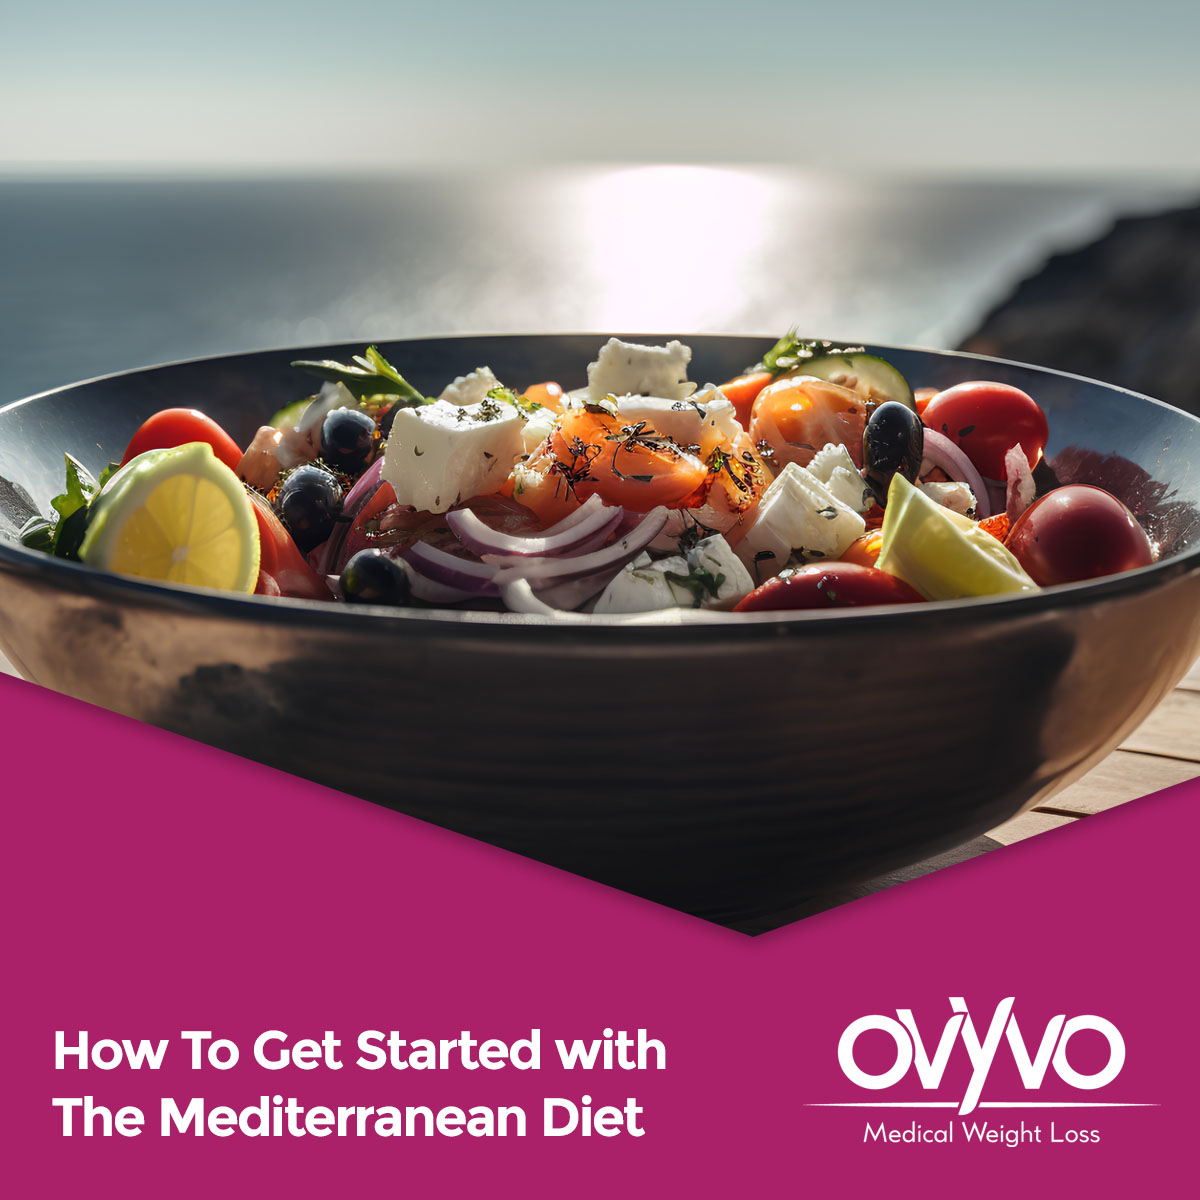 How To Get Started with The Mediterranean Diet for Weight Loss